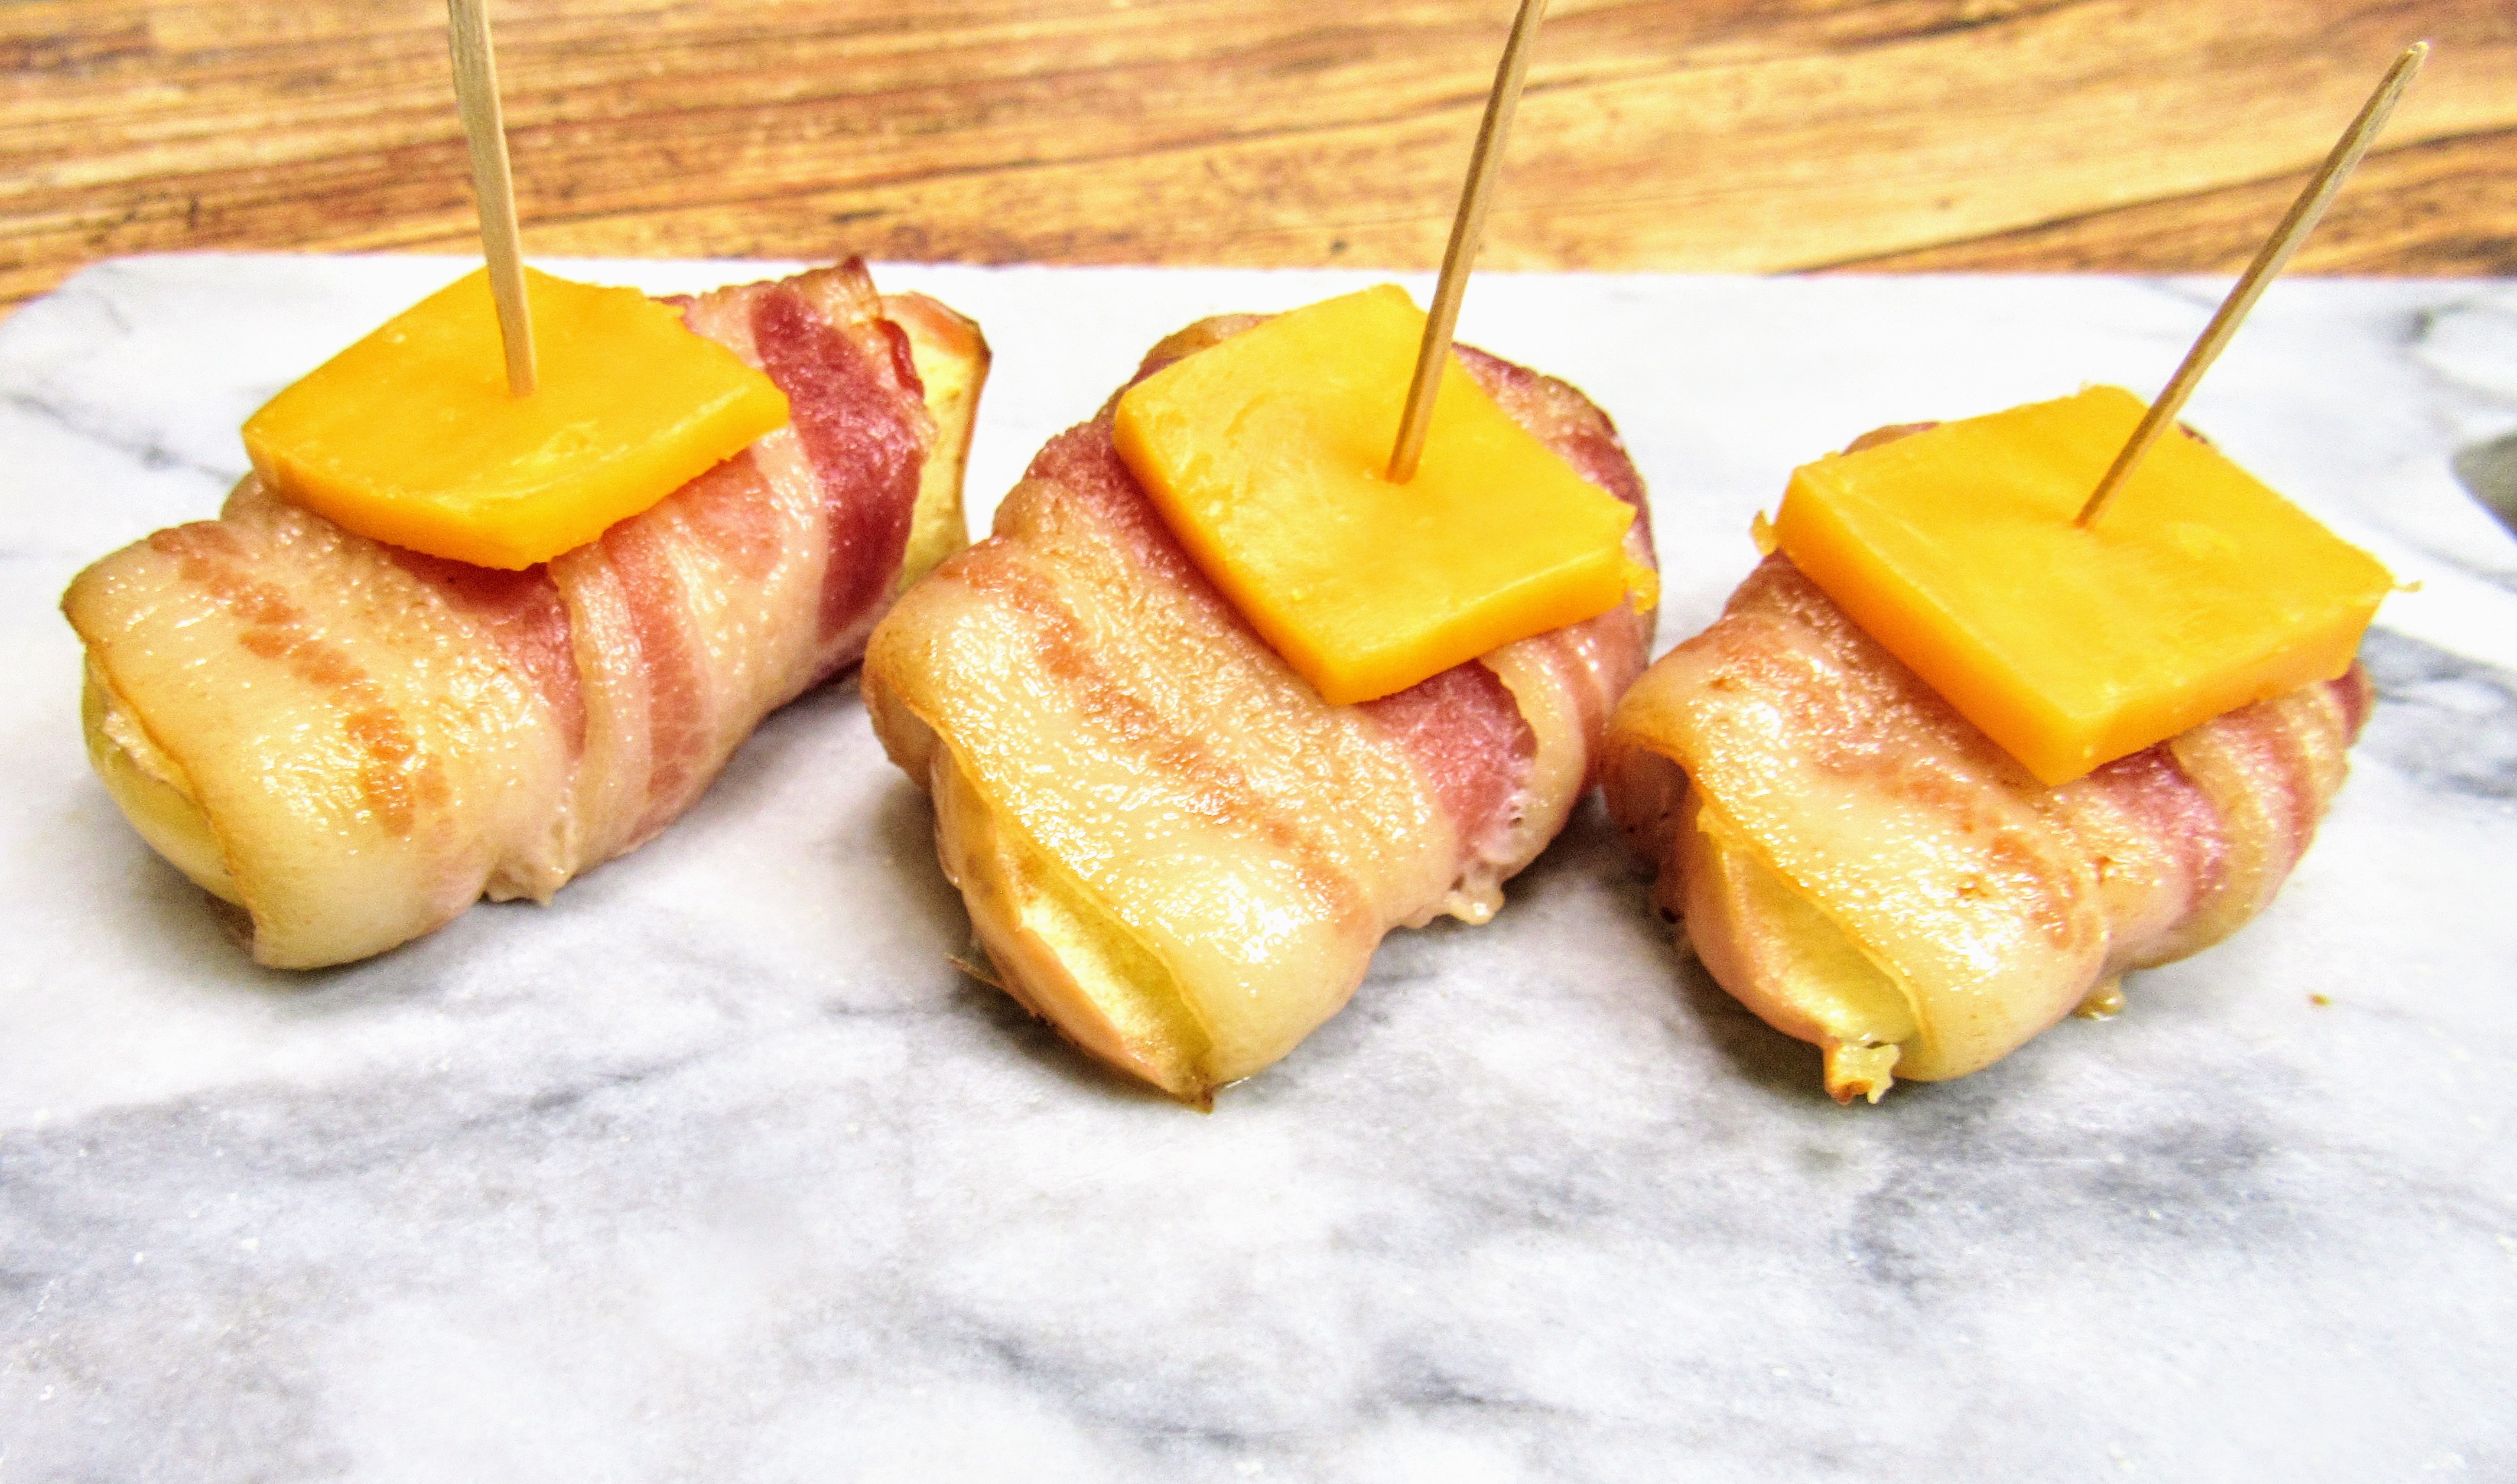 Bacon Wrapped Apples